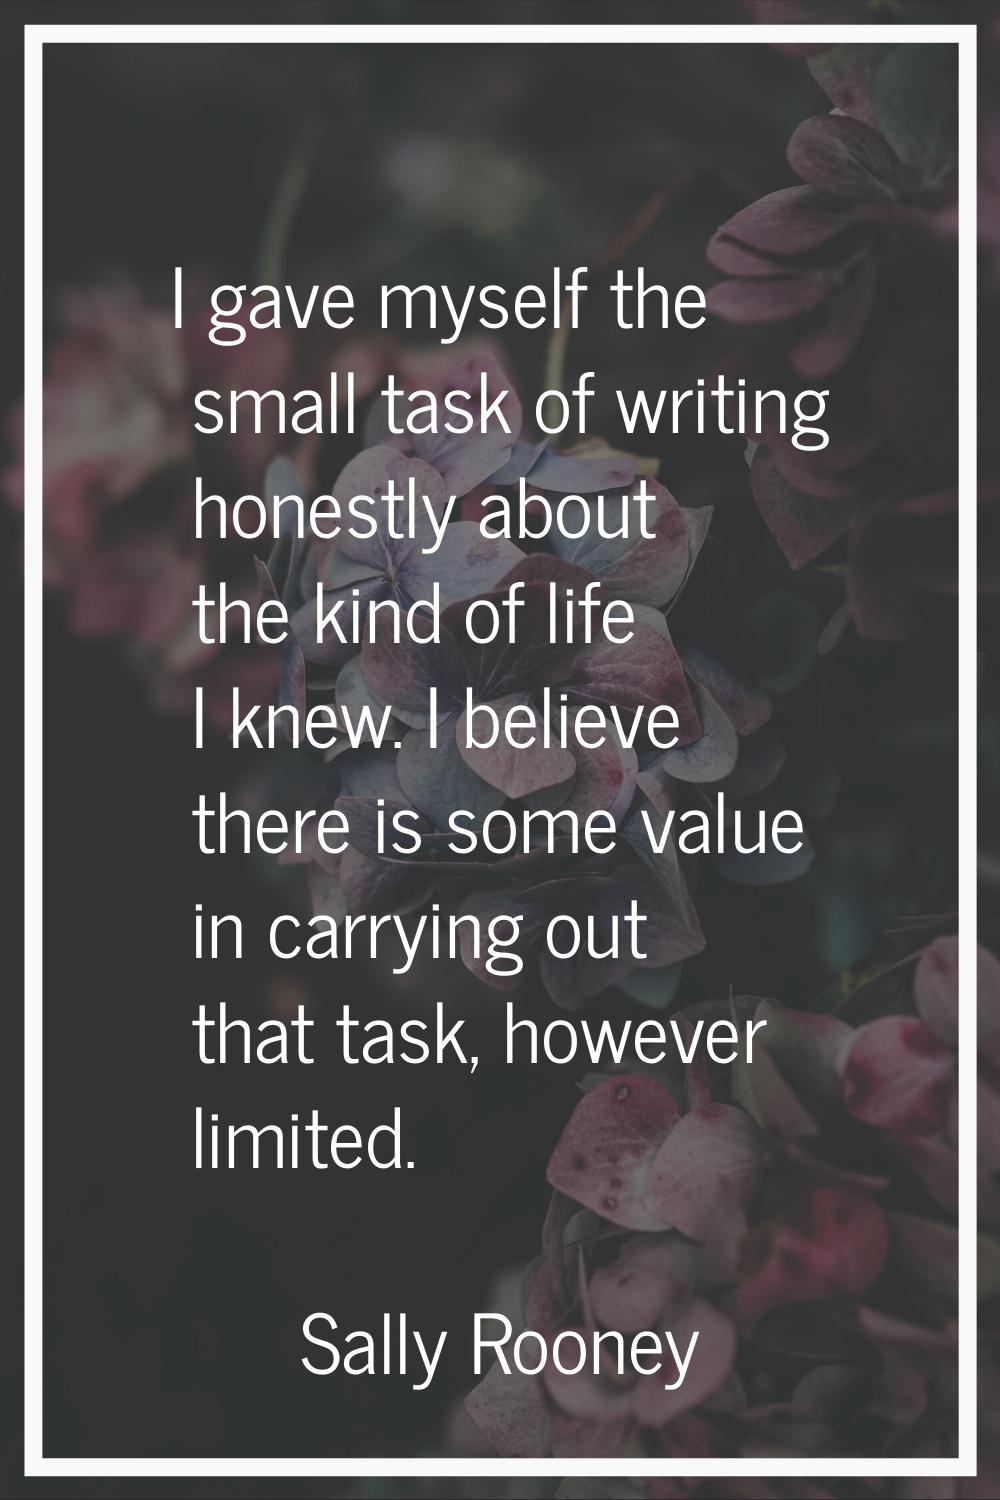 I gave myself the small task of writing honestly about the kind of life I knew. I believe there is 